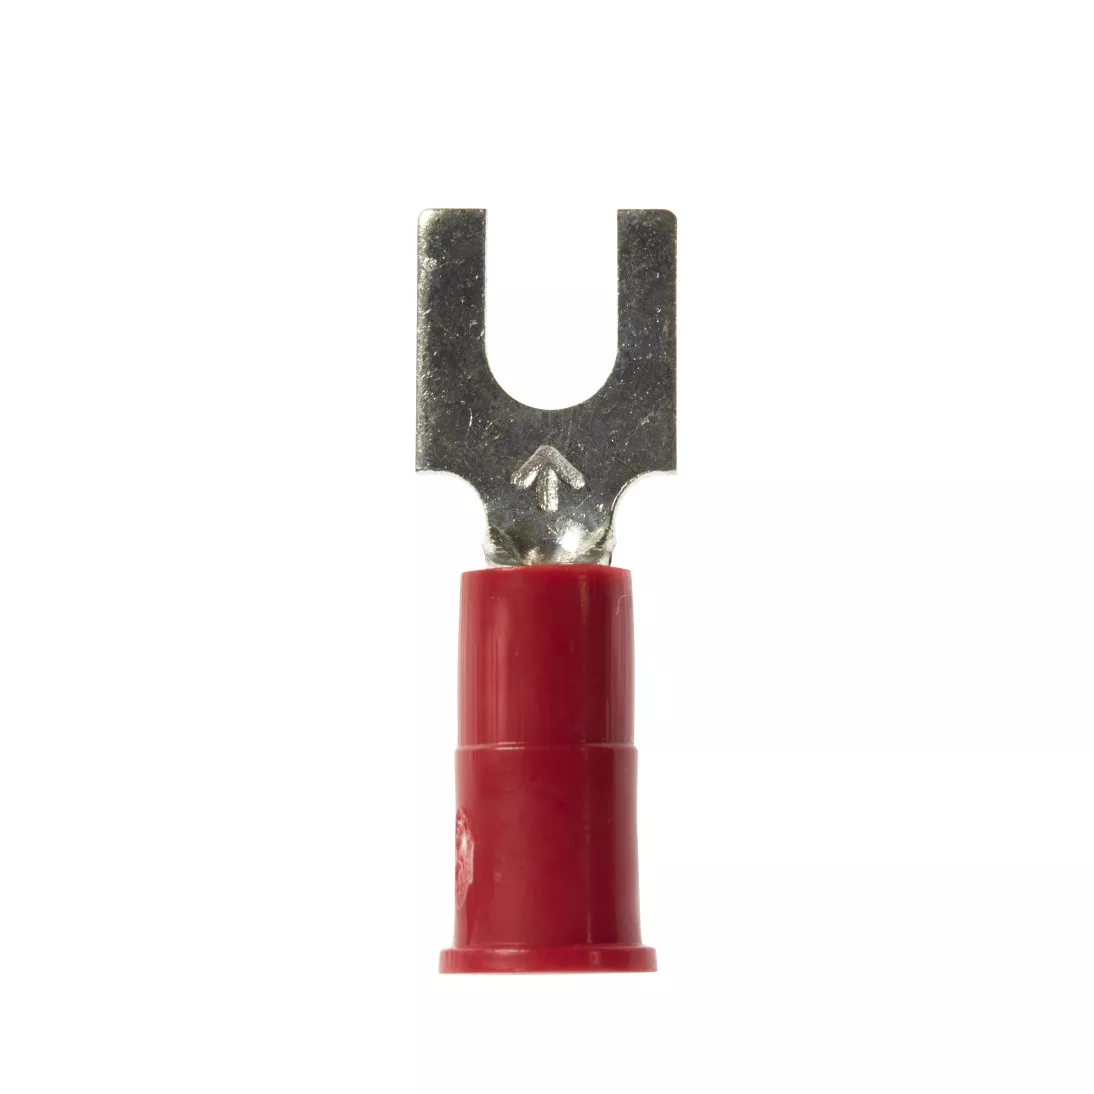 3M™ Scotchlok™ Block Fork Vinyl Insulated, 100/bottle, MV18-6FB/SX,
suitable for use in a terminal block, 500/Case